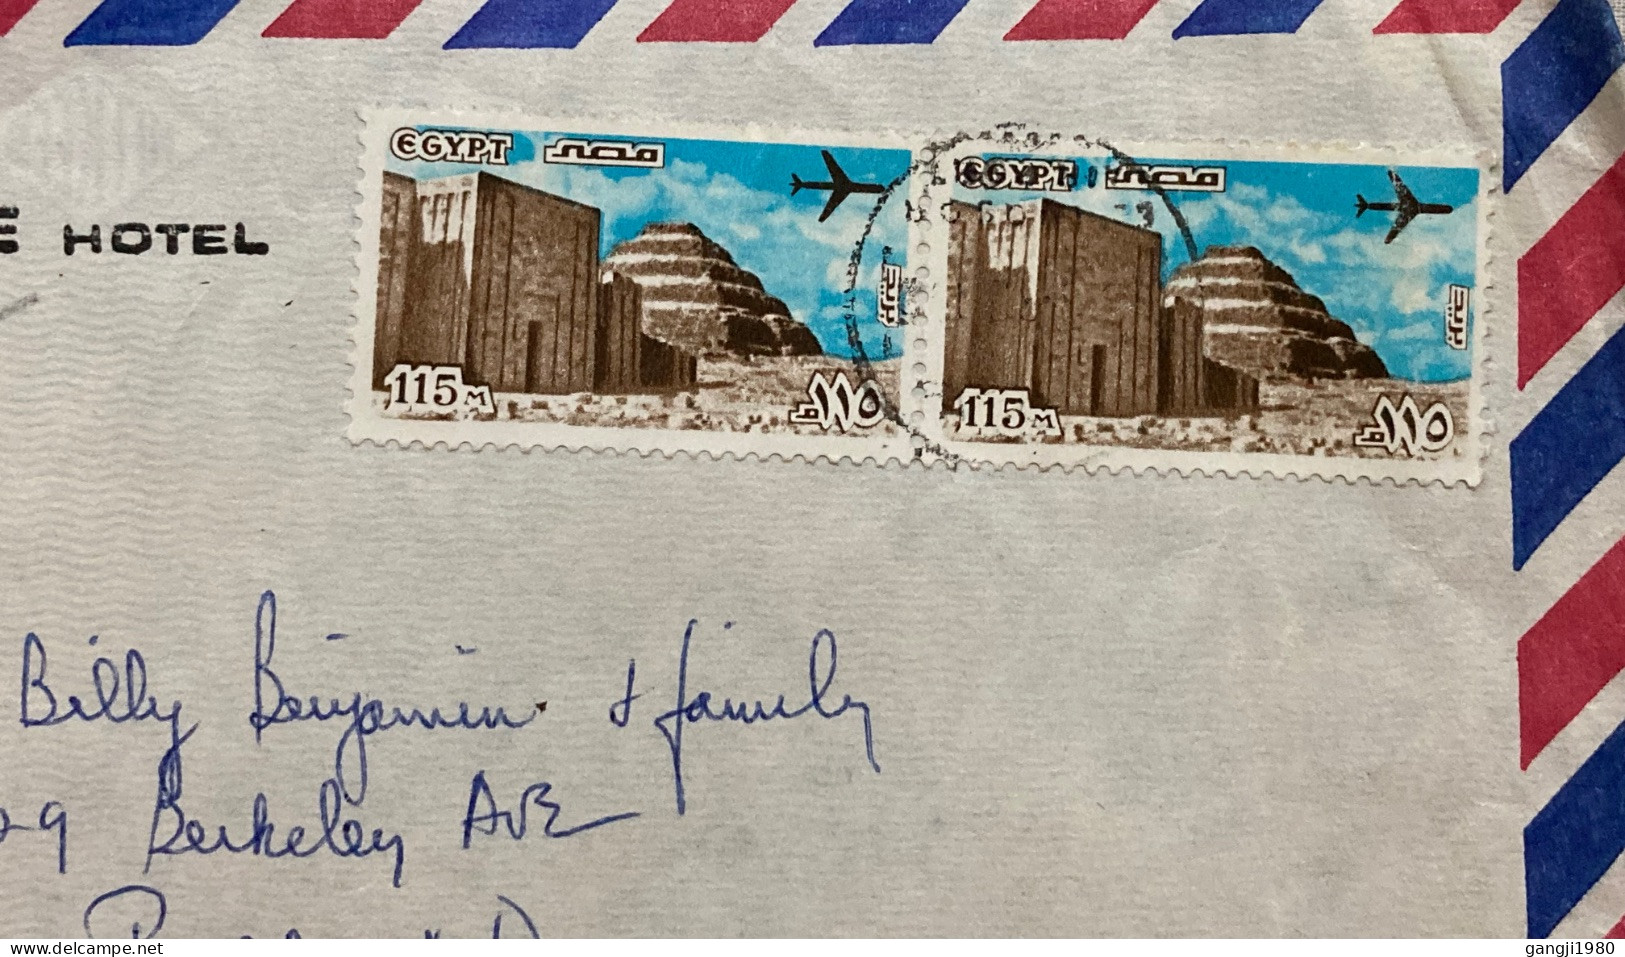 EGYPT 1980, COVER USED TO USA, NEW WINTER PALACE HOTEL, LUXOR, 2 STAMP, PYRAMID, AEROPLANE, ARCHELOGY, BUILDING, HERITAG - Briefe U. Dokumente